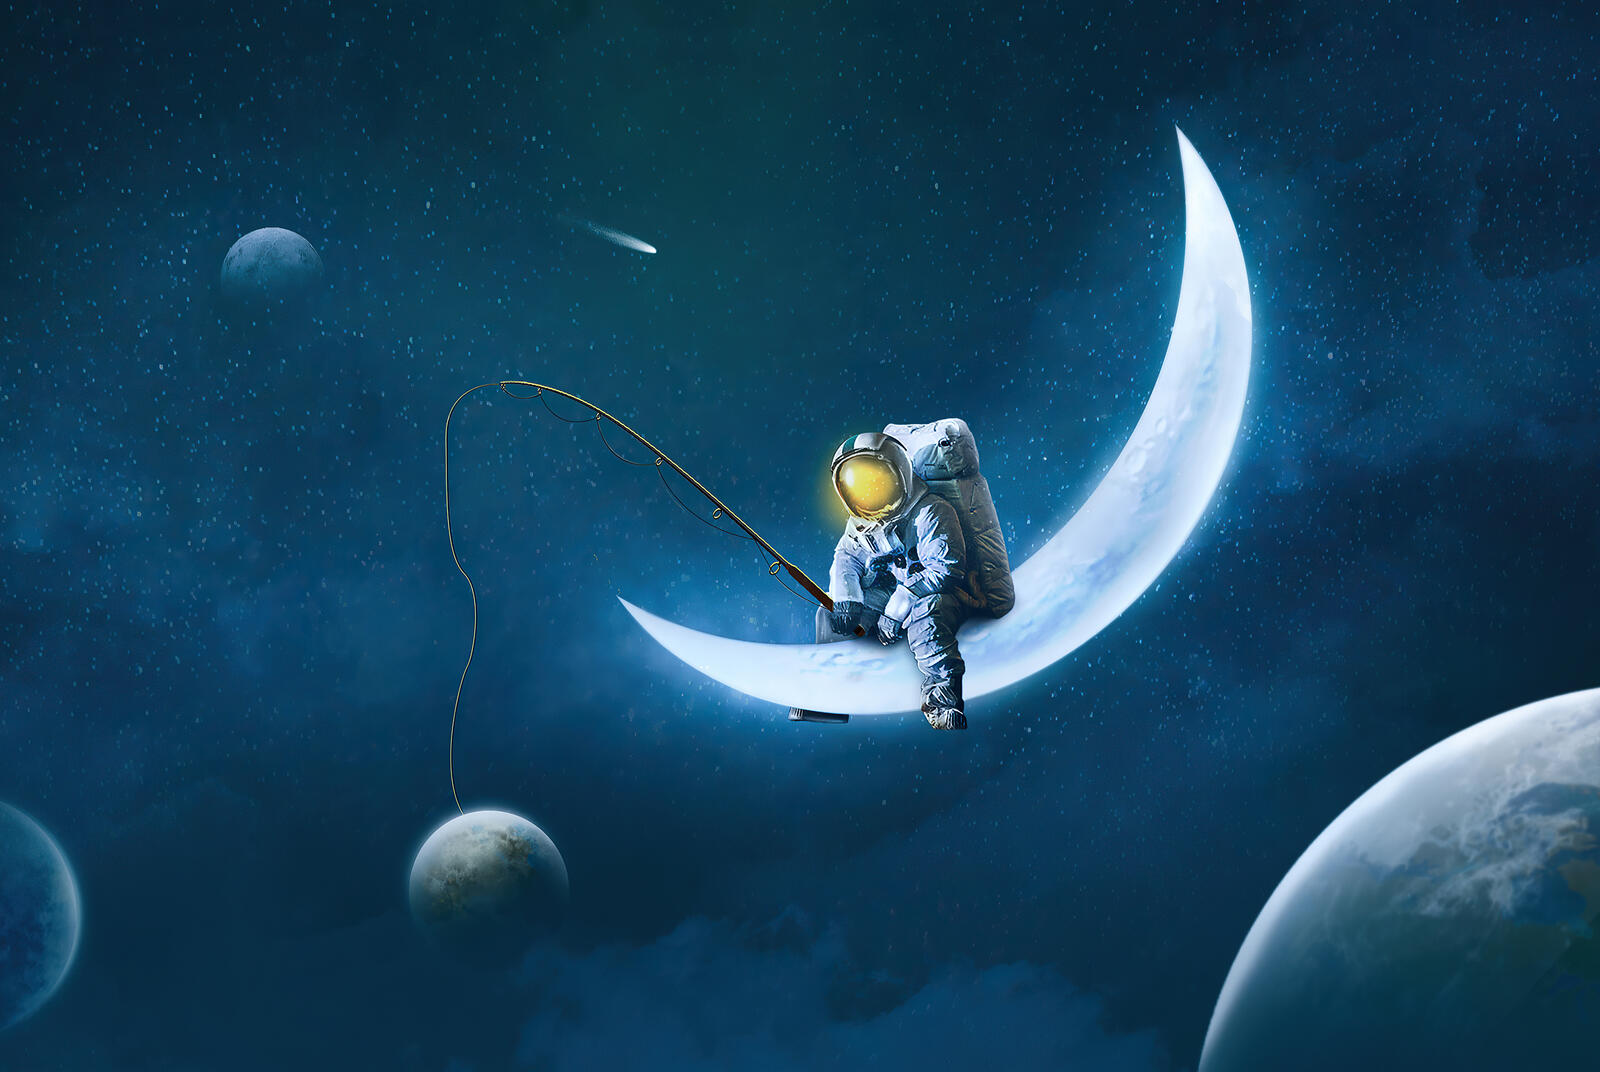 Free photo The astronaut is fishing from a crescent moon.